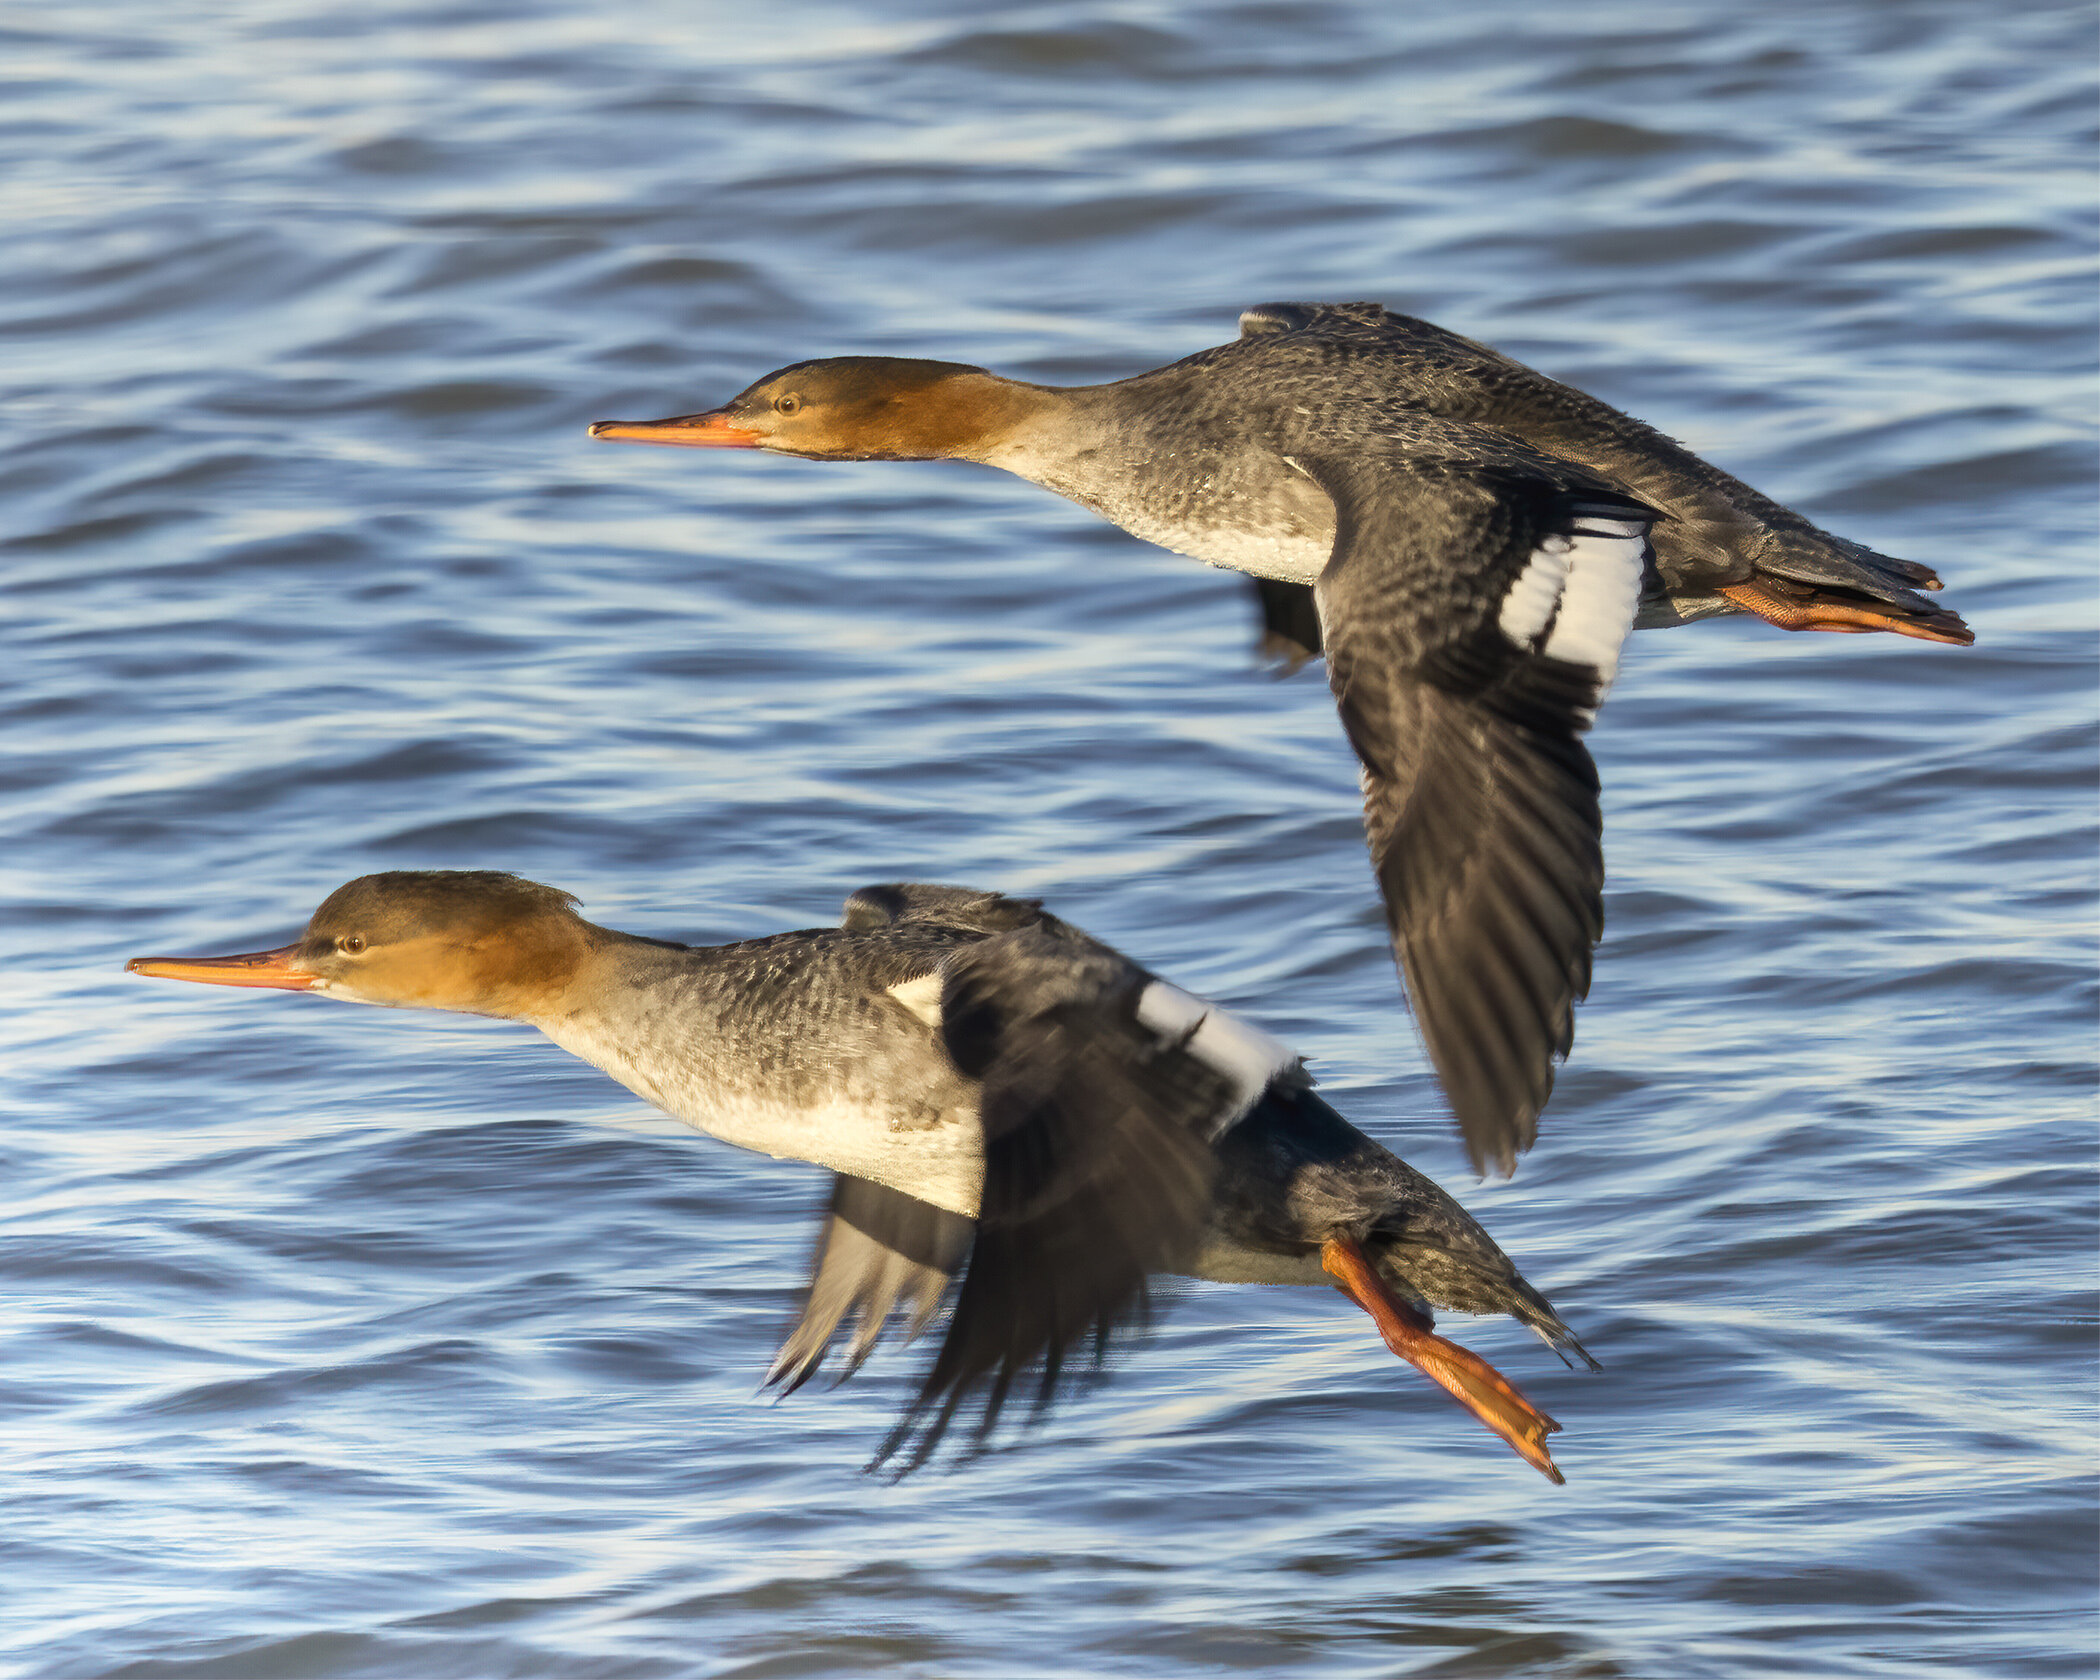 1st place -Two Mergansers on Their Way - Joe Eichers